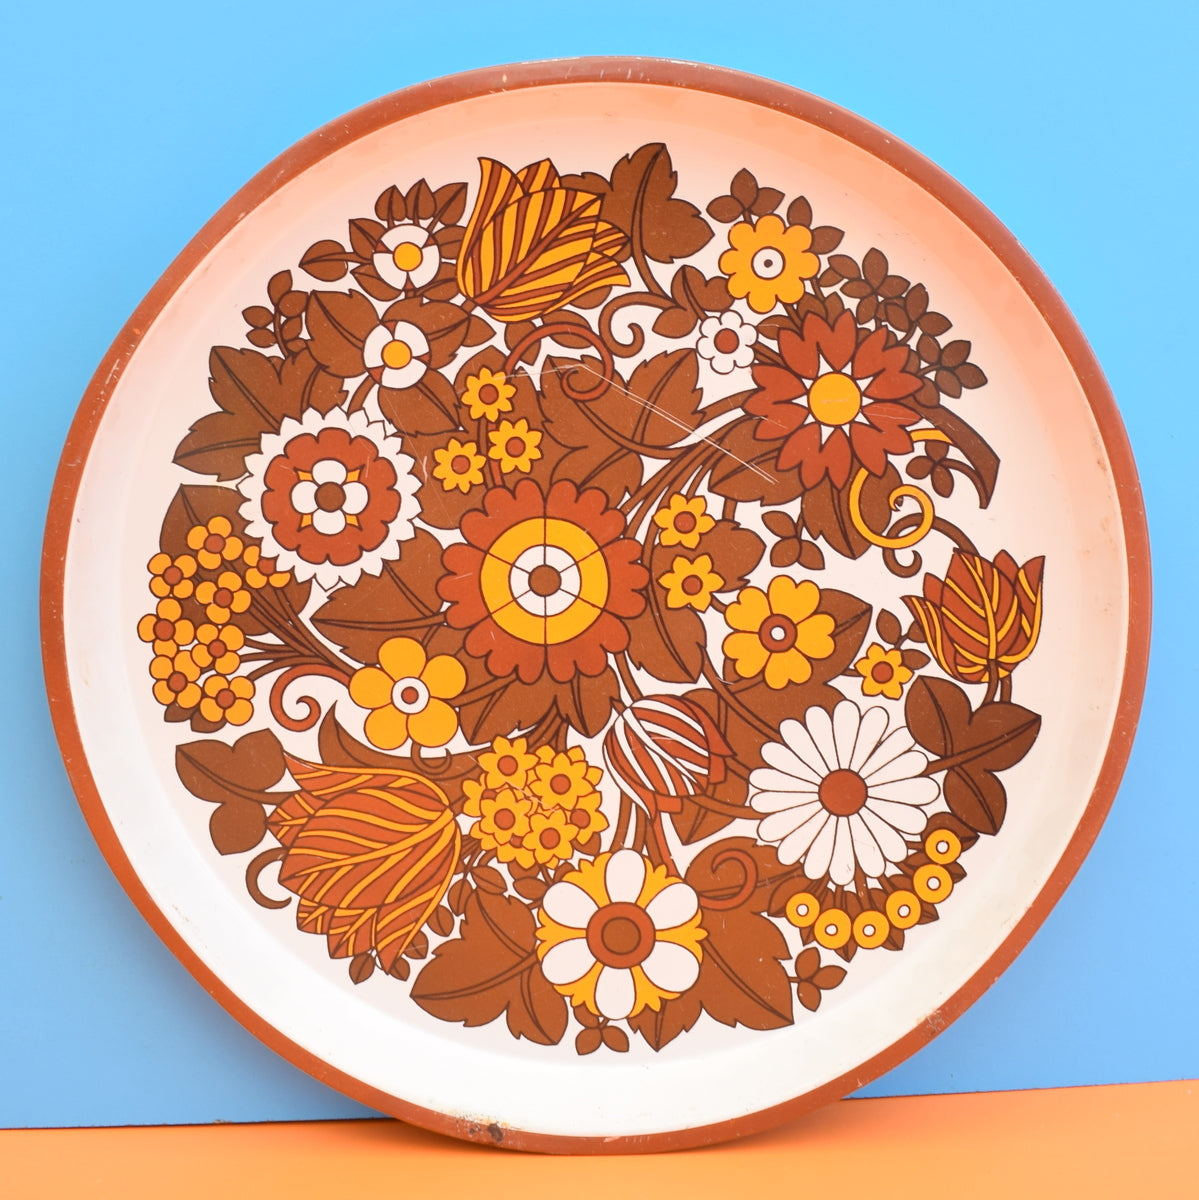 Vintage 1960s Round Flower Power Metal Tray - Brown & Yellow